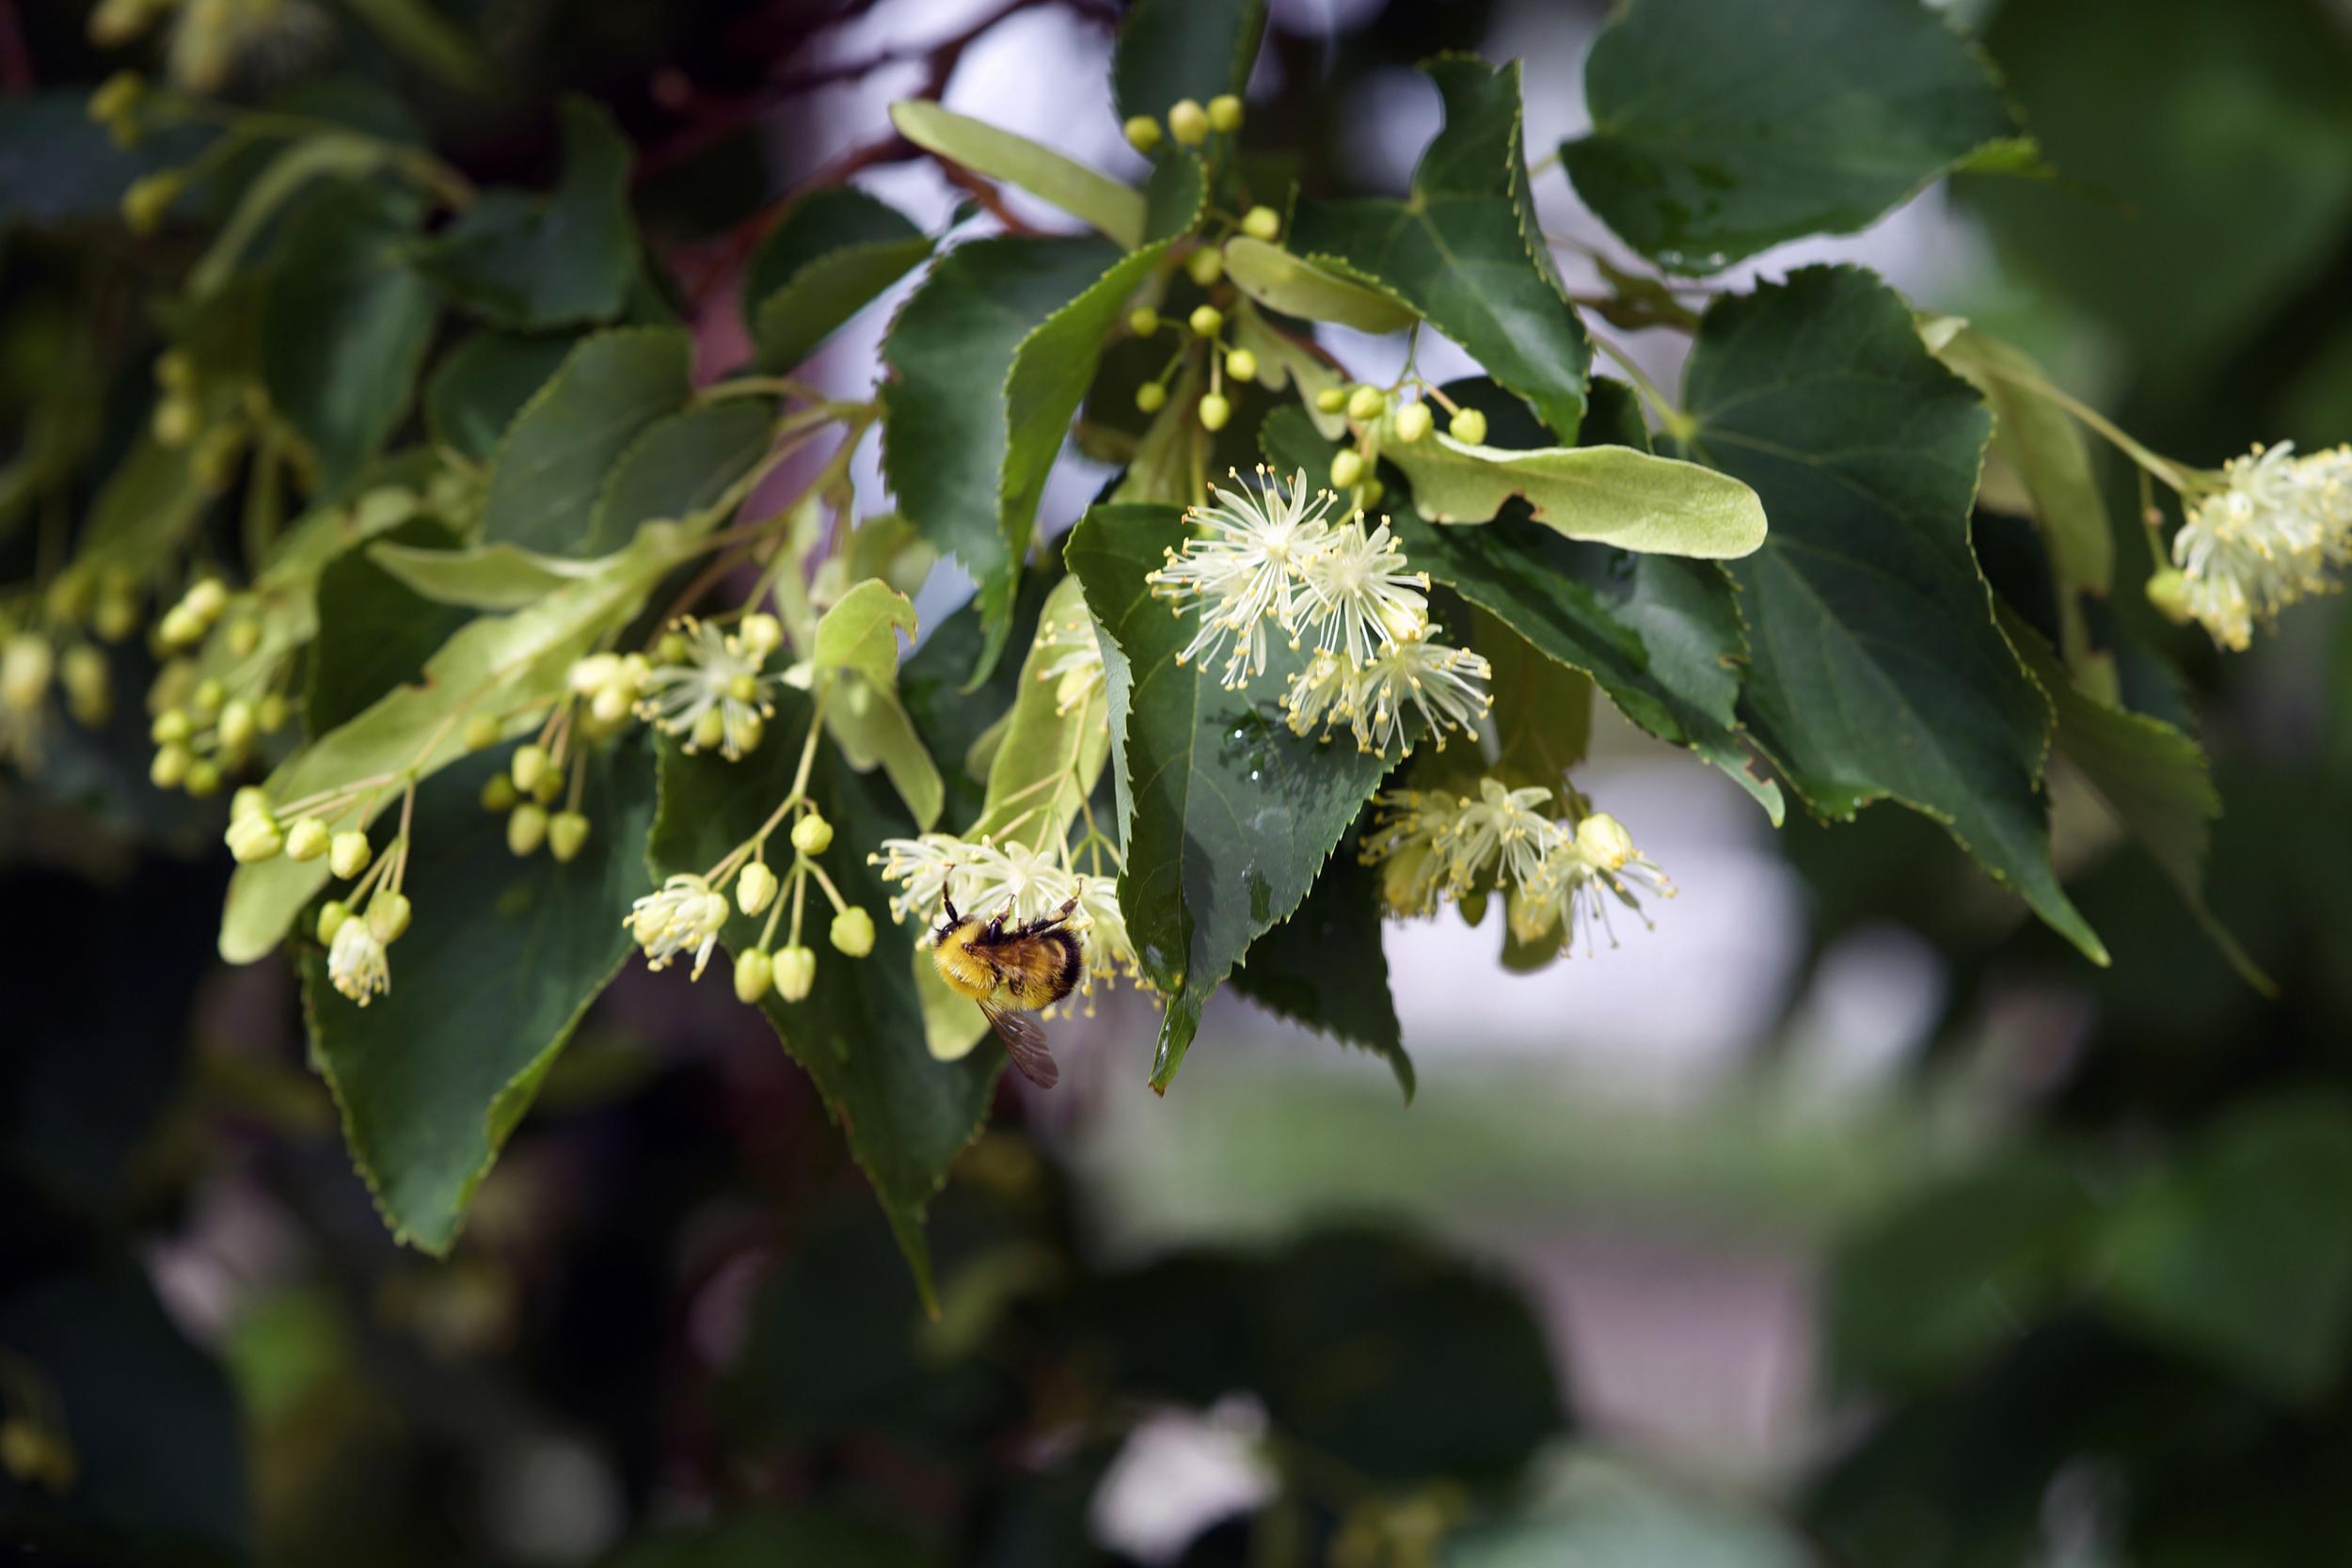 Researchers believe Linden trees could be partly responsible for mass bumblebee deaths (Claire Lande)